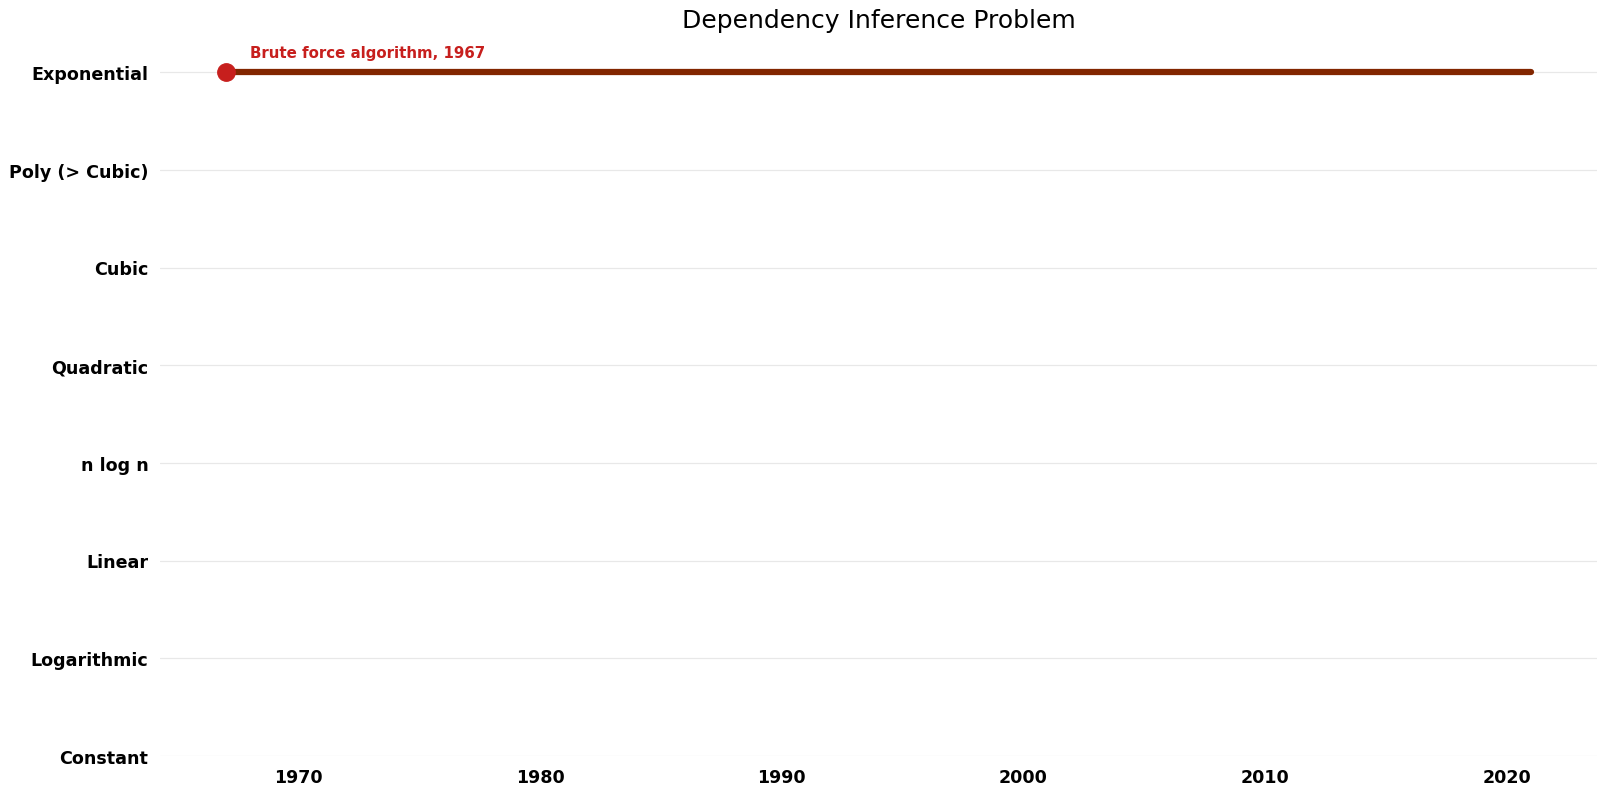 File:Dependency Inference Problem - Space.png